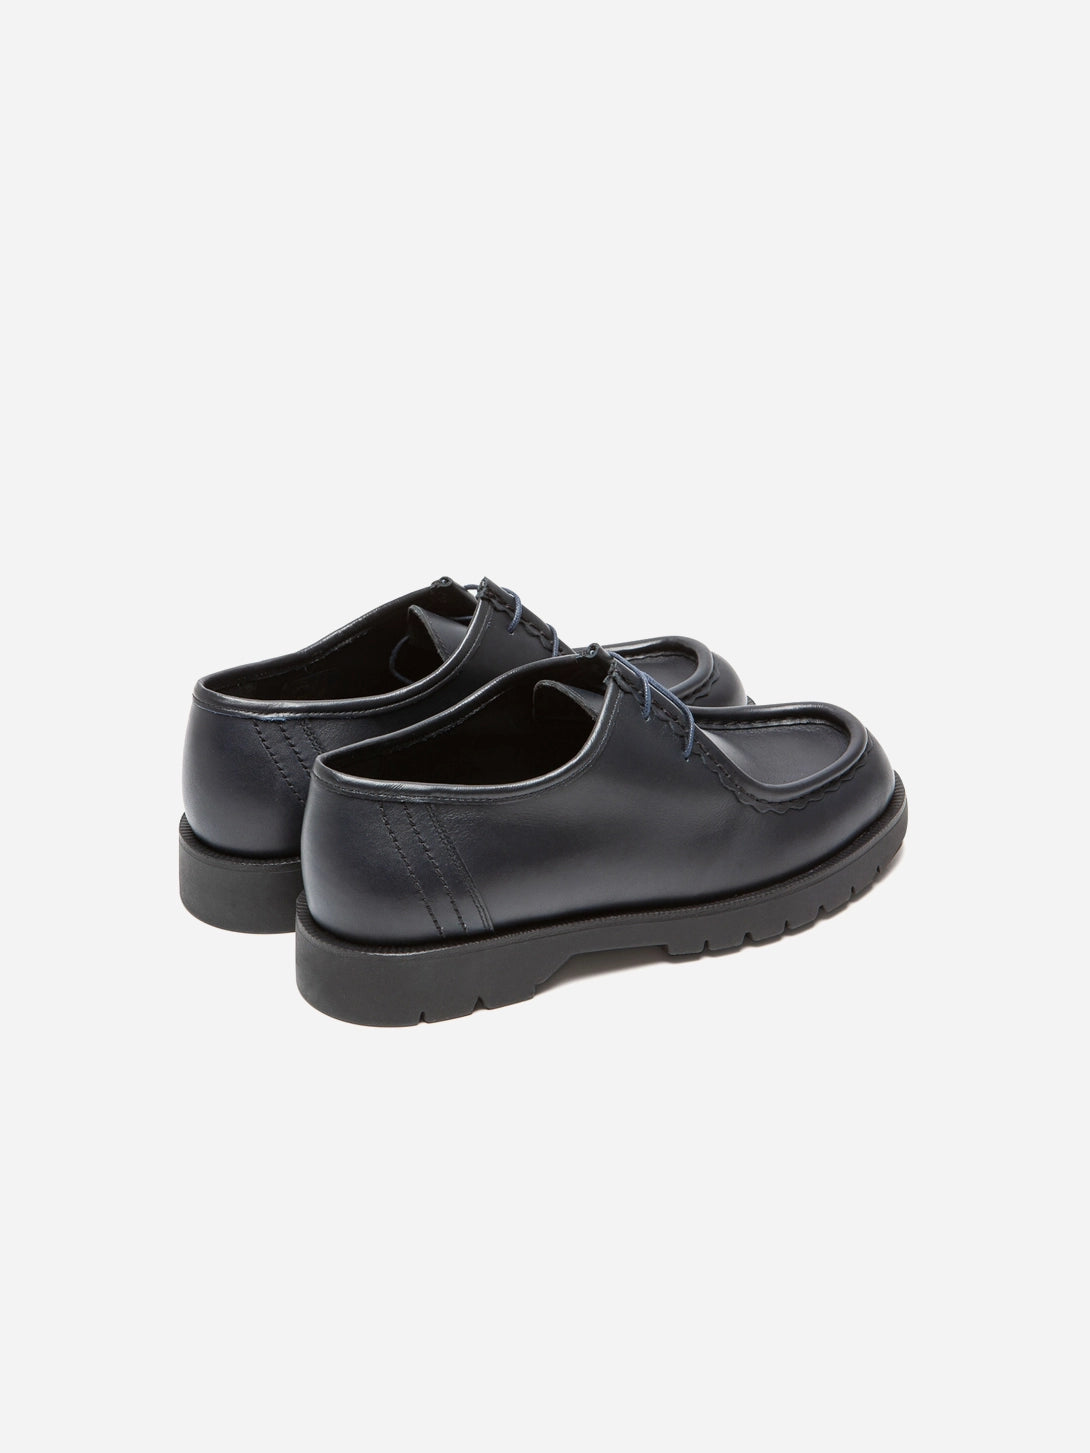 NAVY Kleman Padror Loafer Shoes